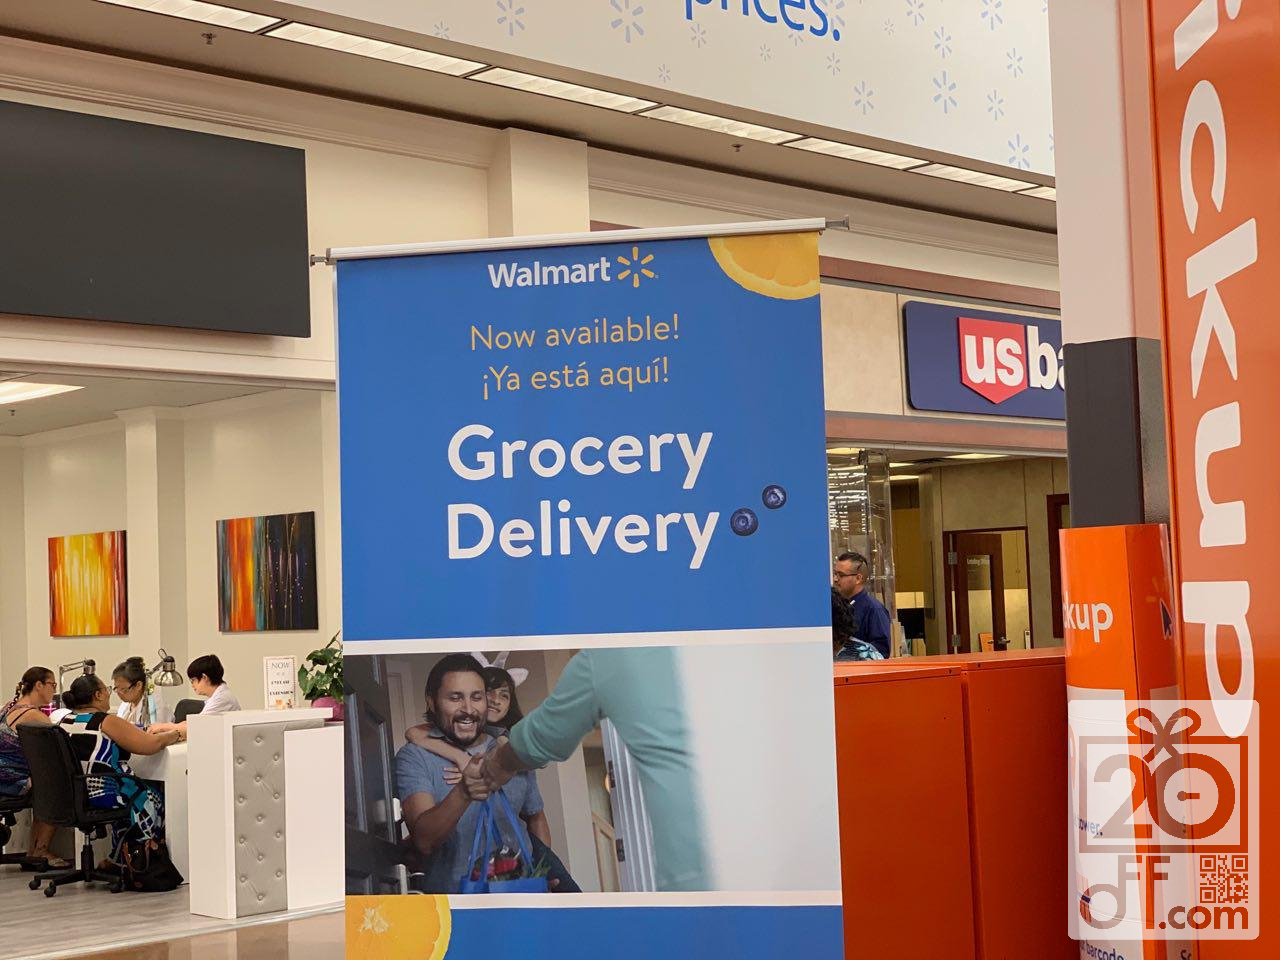 Walmart Store Grocery Delivery